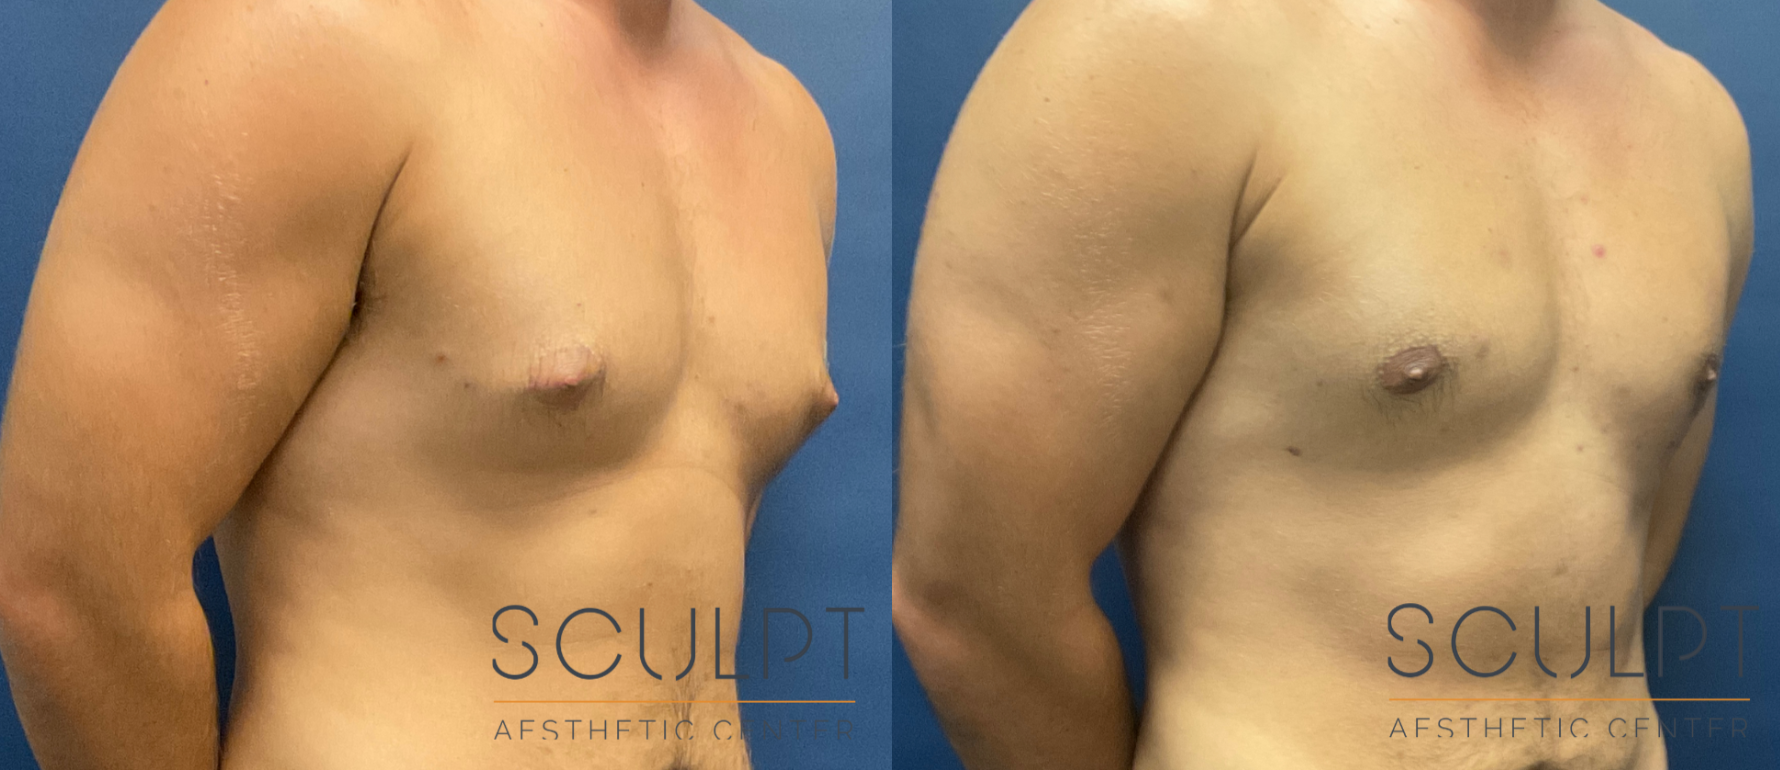 Gynecomastia Before & After Sculpcenter